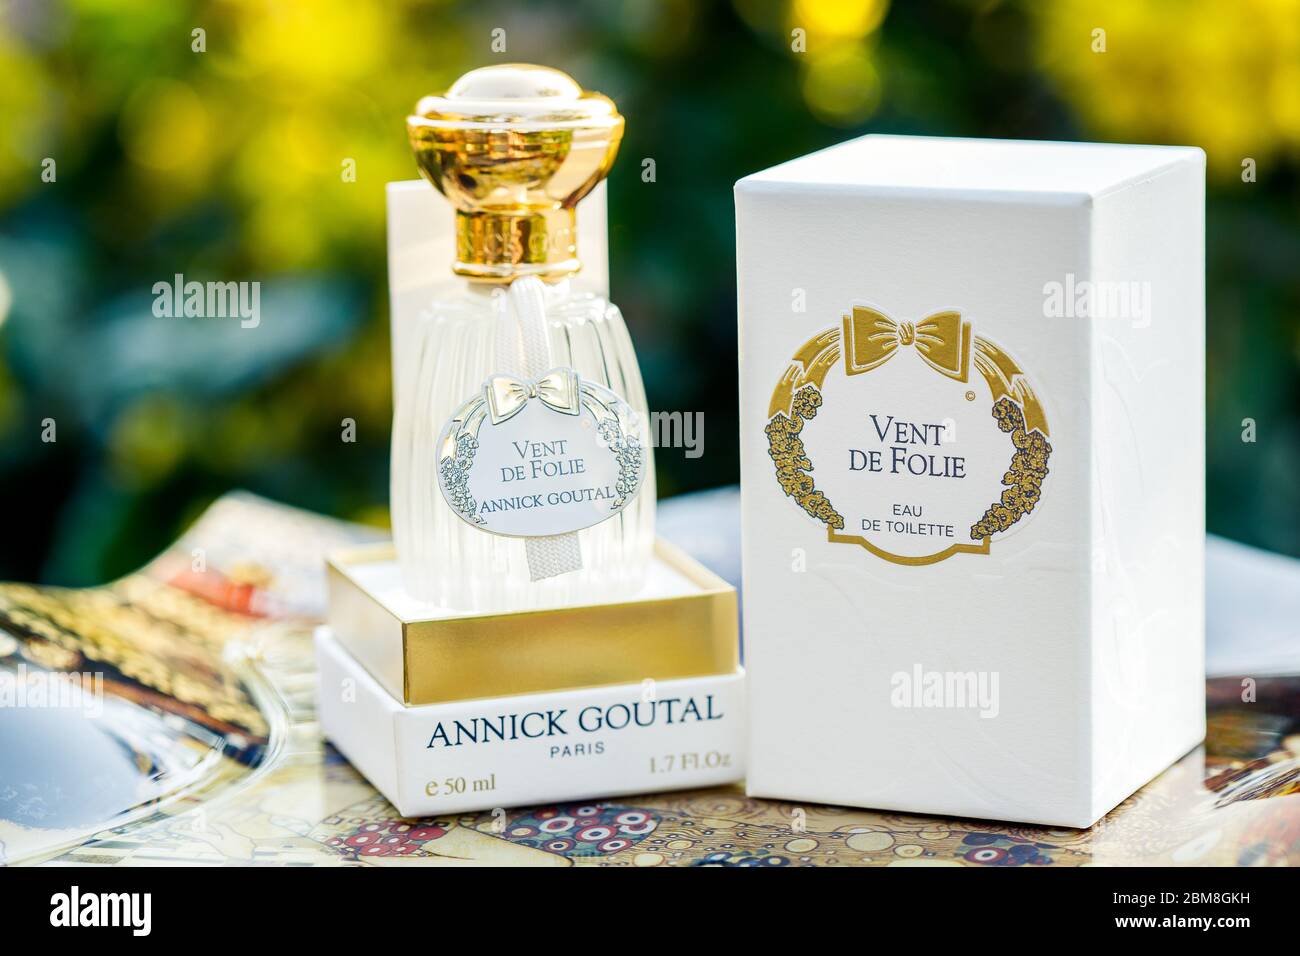 PARIS, FRANCE -5 MAY 2020 - Perfume bottles at an Annick Goutal